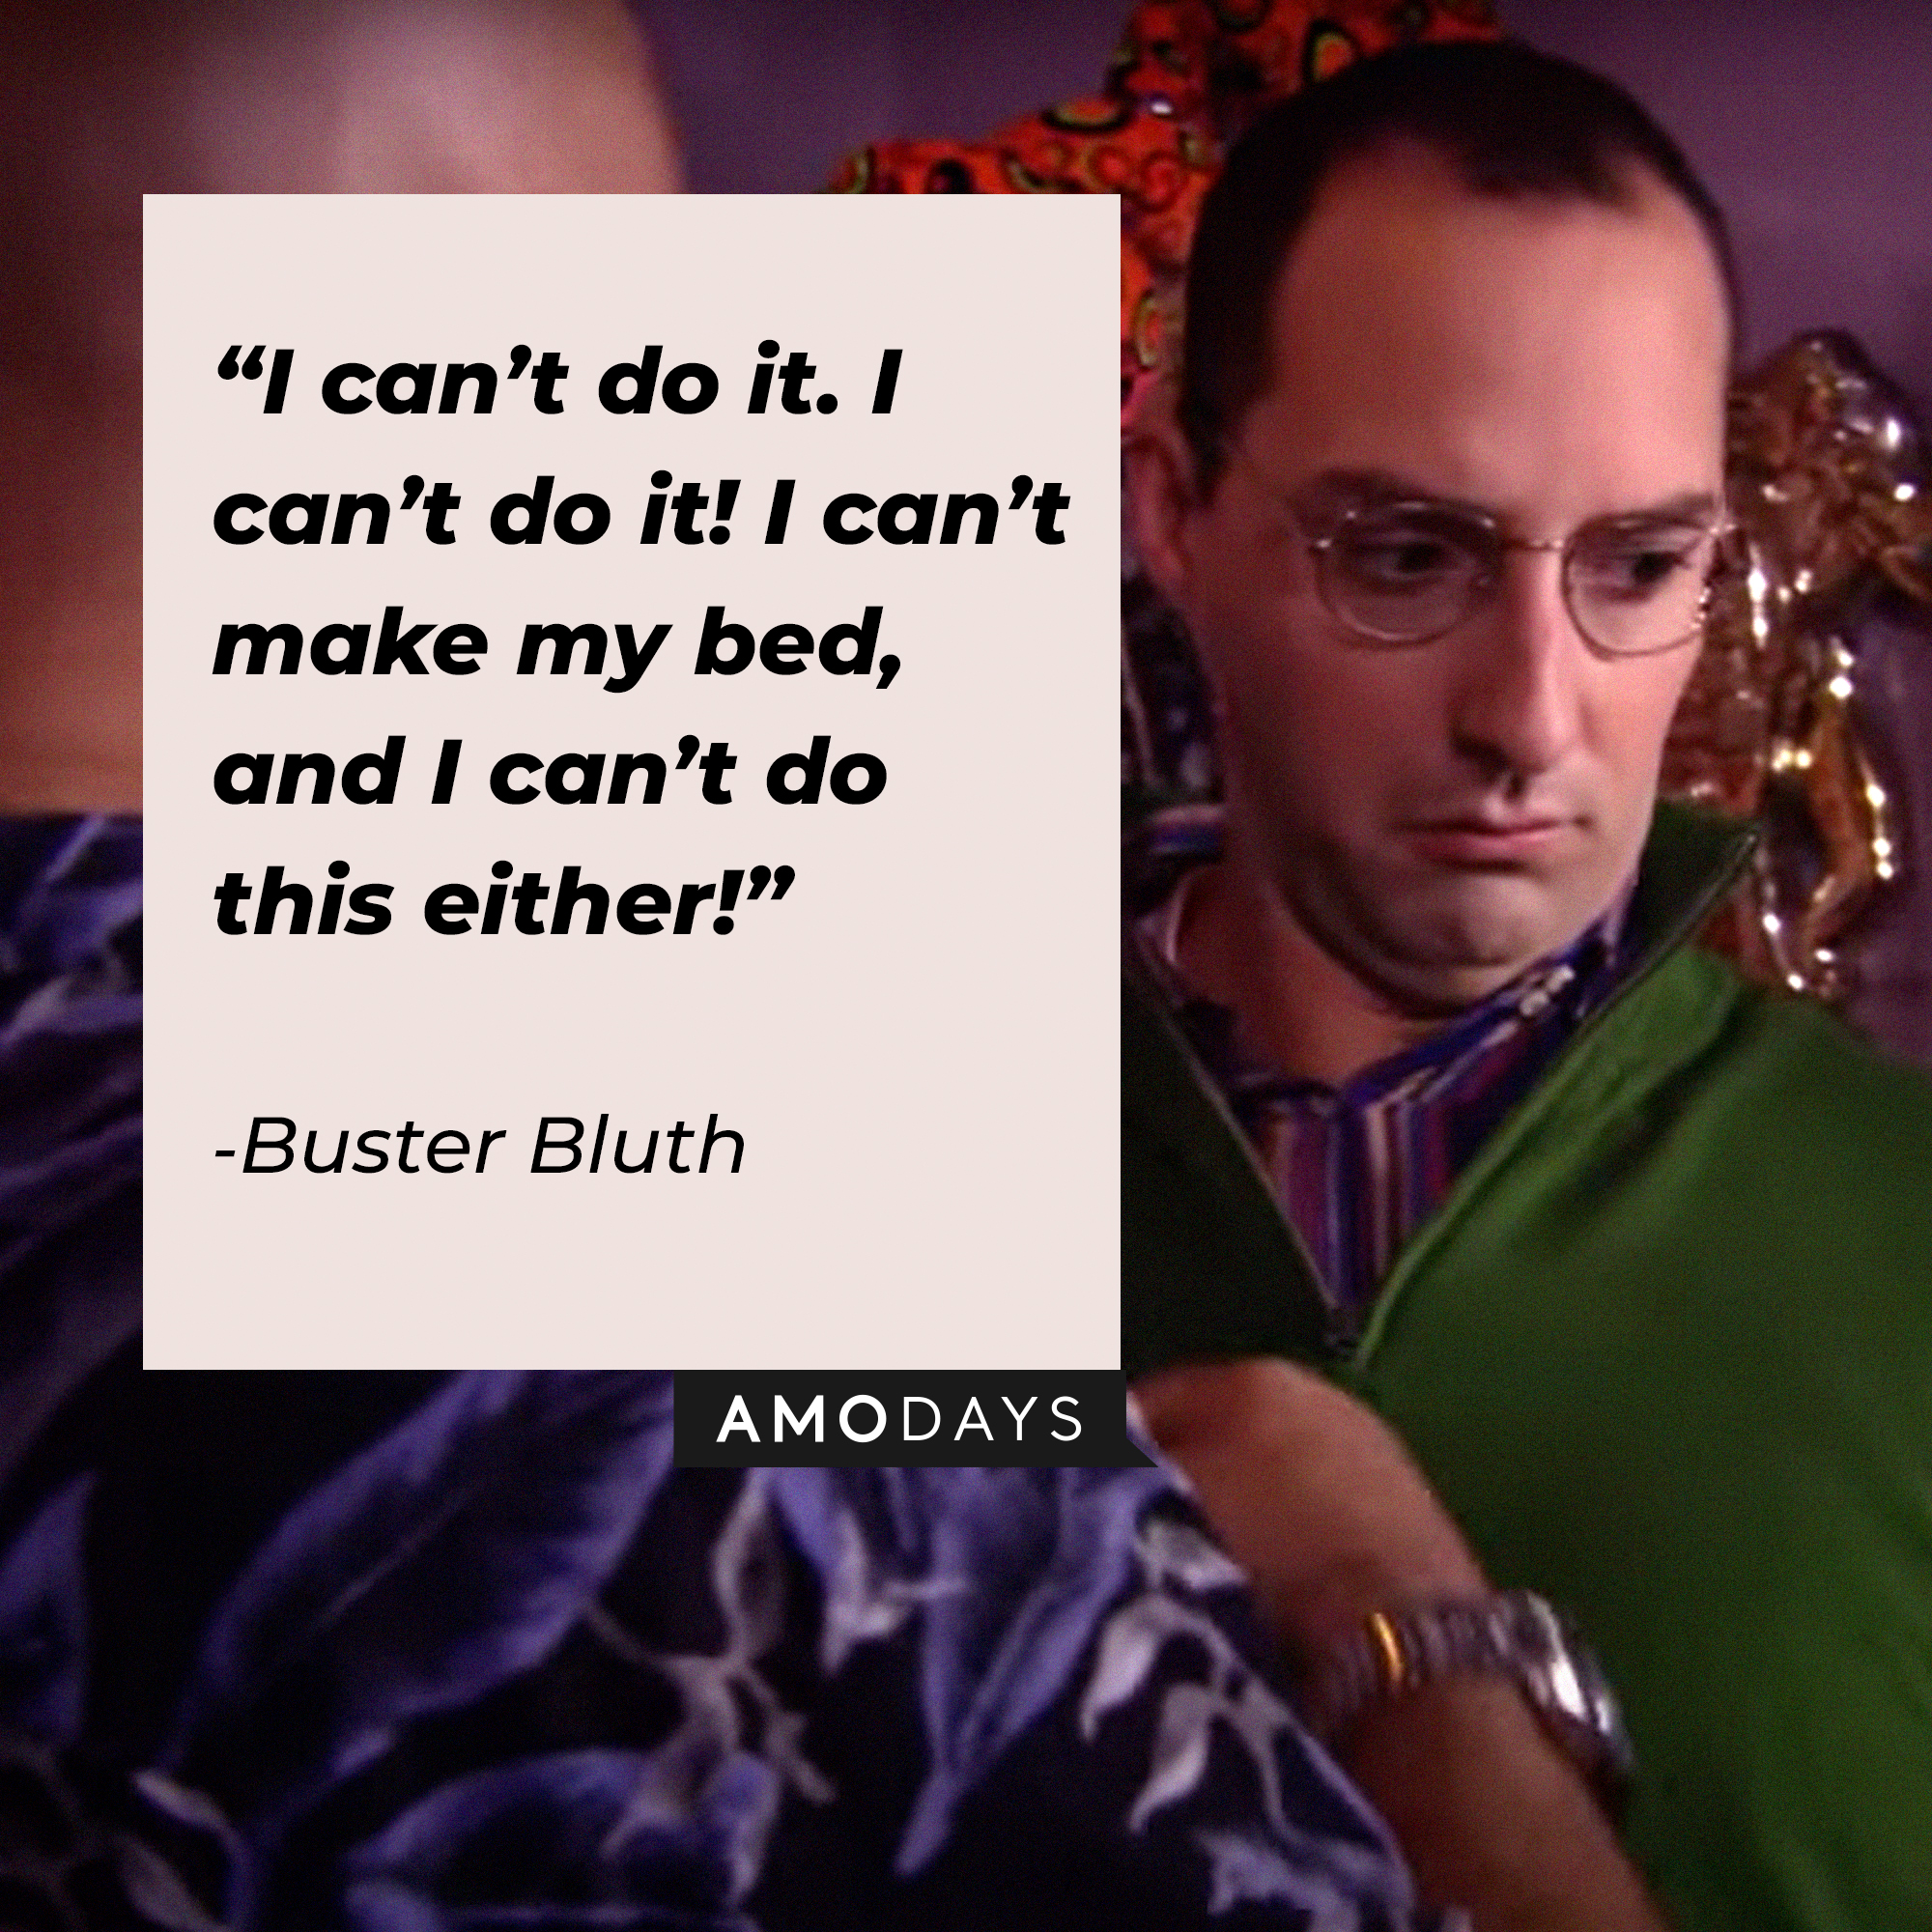 Buster Bluth, with his quote: “I can’t do it. I can’t do it! I can’t make my bed, and I can’t do this either!” | Source: youtube.com/arresteddev